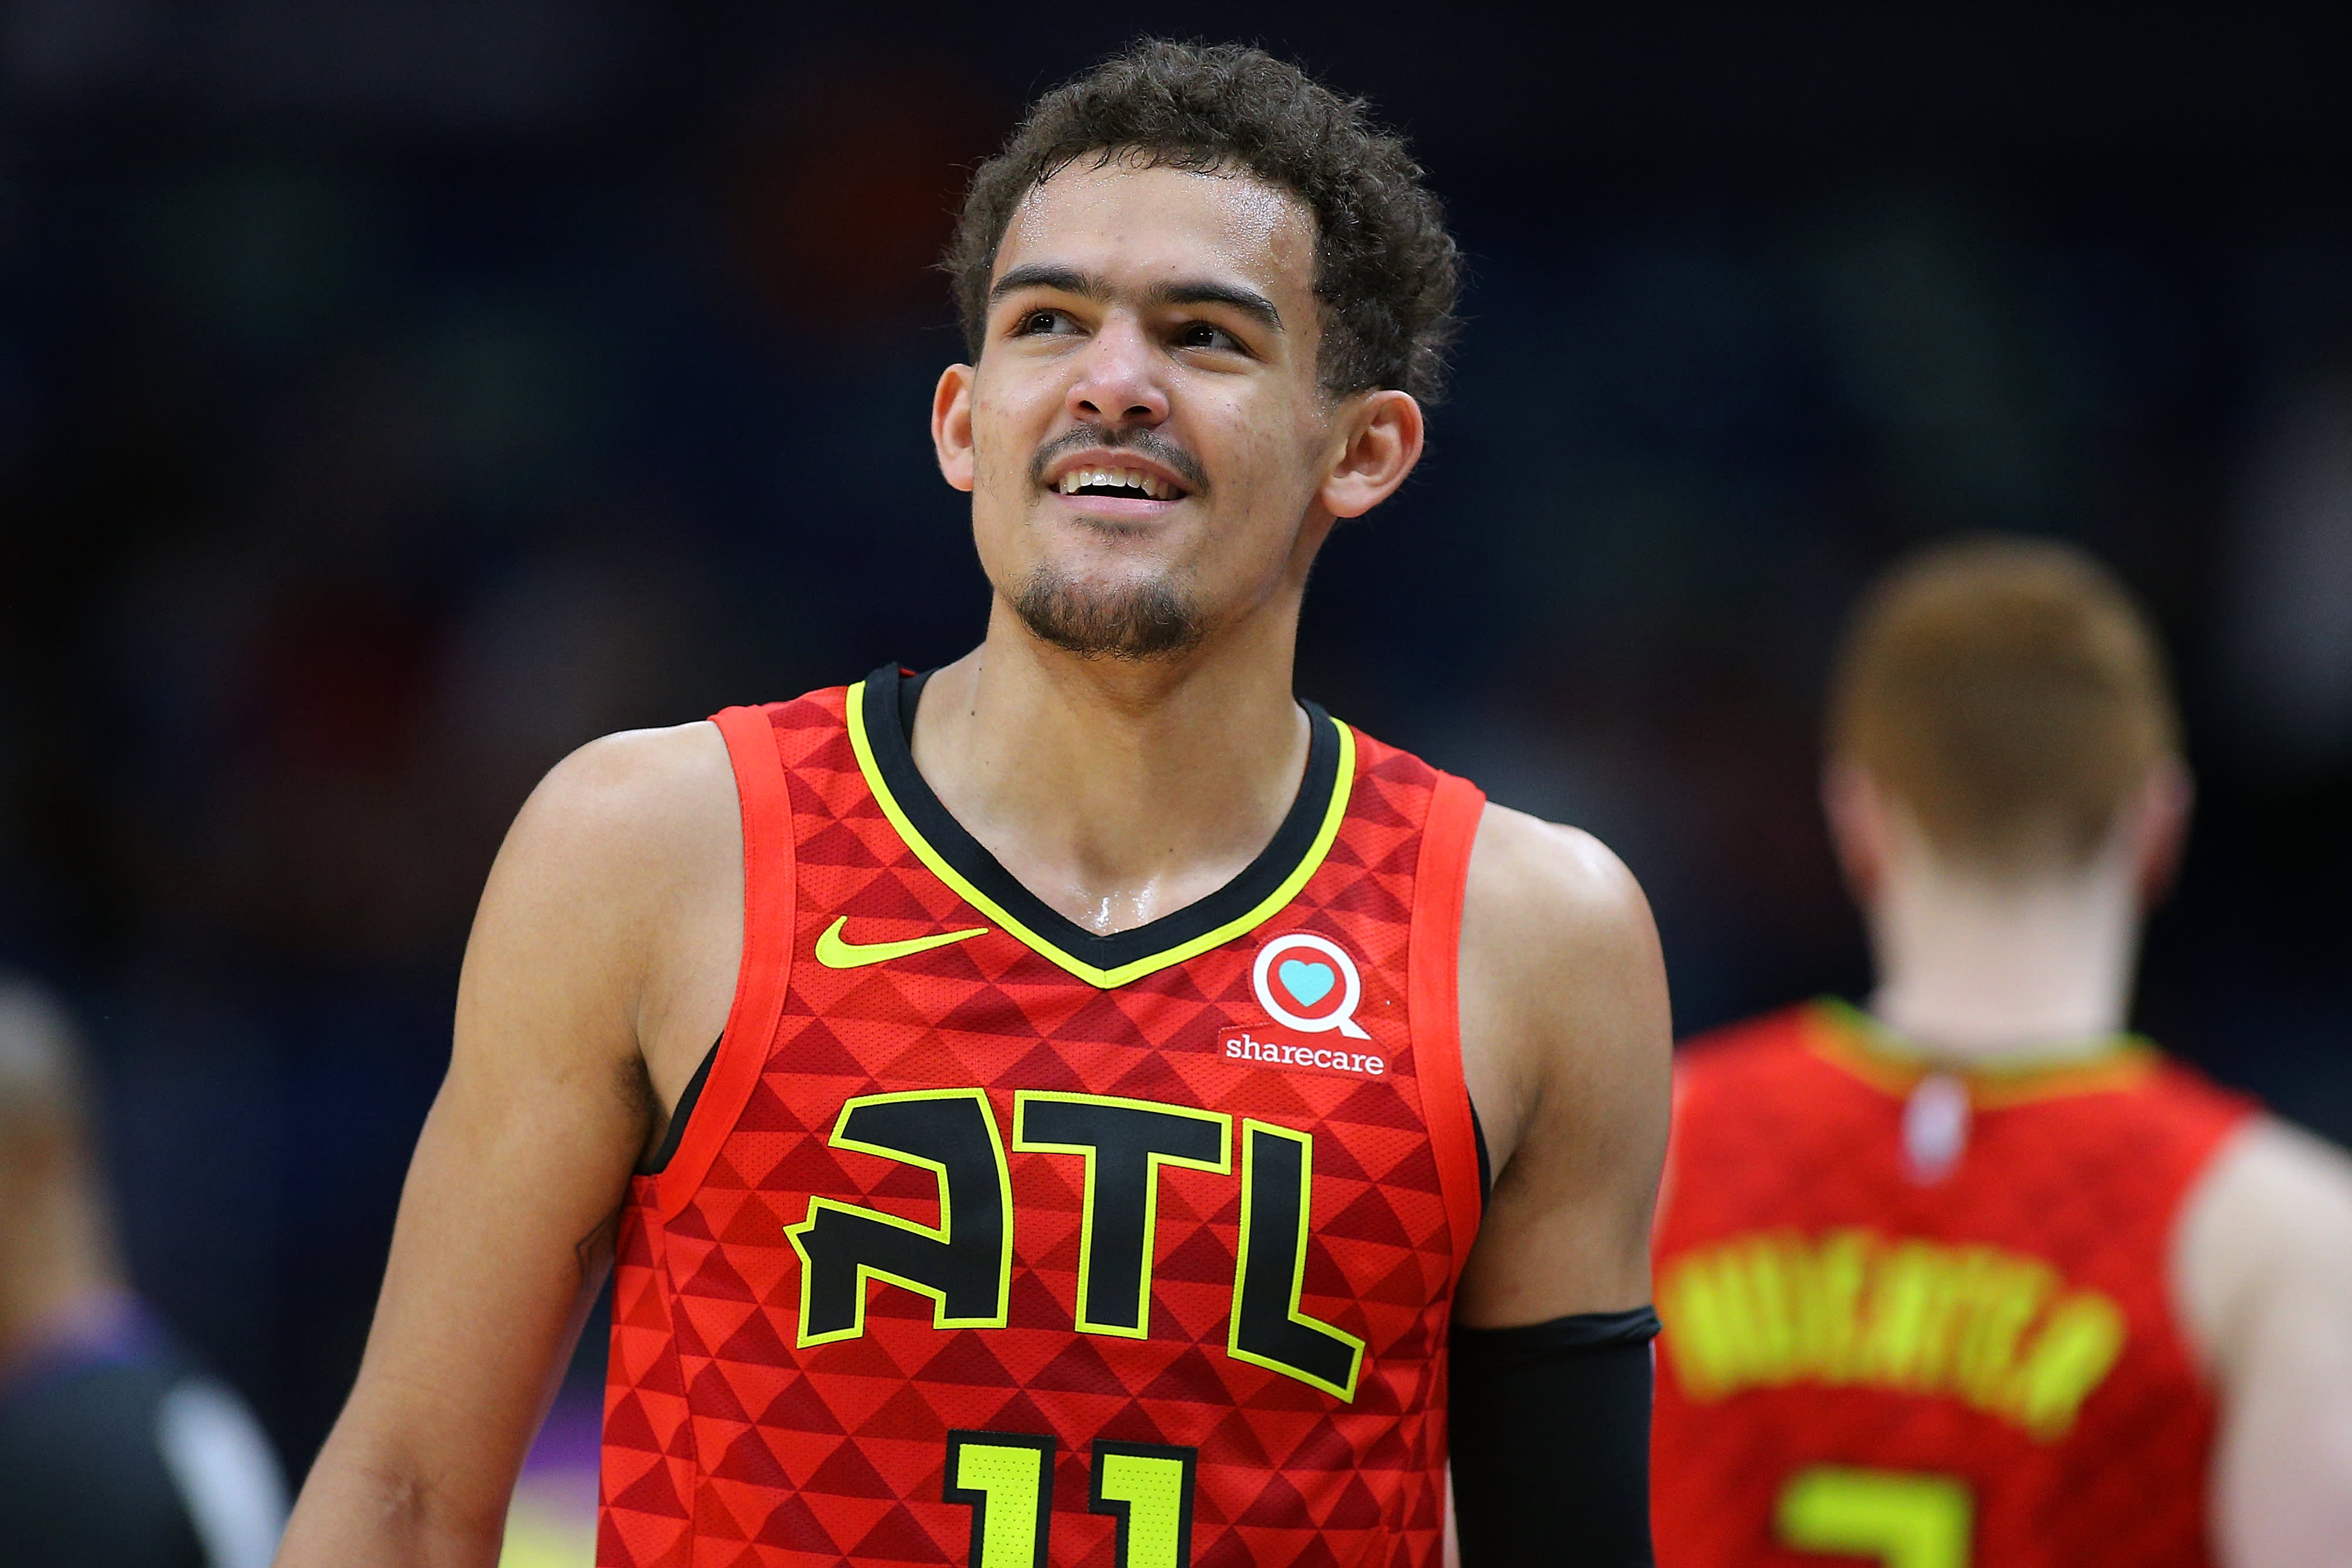 NBA star Trae Young's dad made him get a credit card in high school